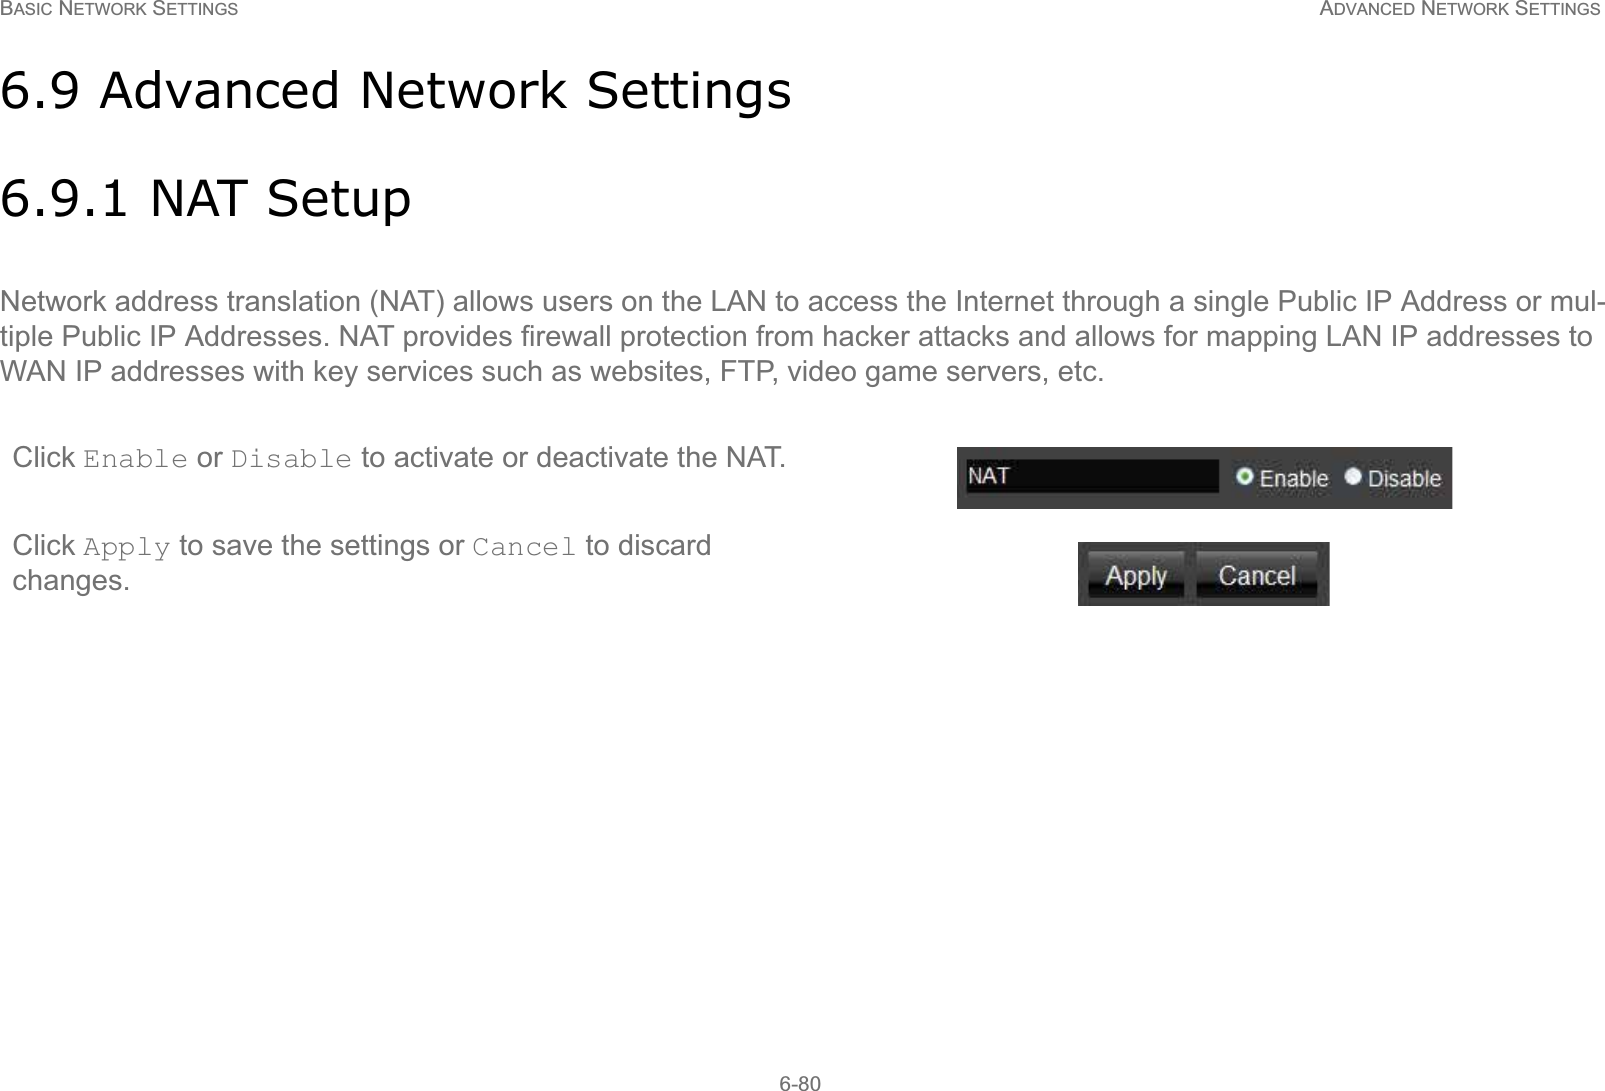 BASIC NETWORK SETTINGS ADVANCED NETWORK SETTINGS6-806.9 Advanced Network Settings6.9.1 NAT SetupNetwork address translation (NAT) allows users on the LAN to access the Internet through a single Public IP Address or mul-tiple Public IP Addresses. NAT provides firewall protection from hacker attacks and allows for mapping LAN IP addresses to WAN IP addresses with key services such as websites, FTP, video game servers, etc.Click Enable or Disable to activate or deactivate the NAT.Click Apply to save the settings or Cancel to discard changes.